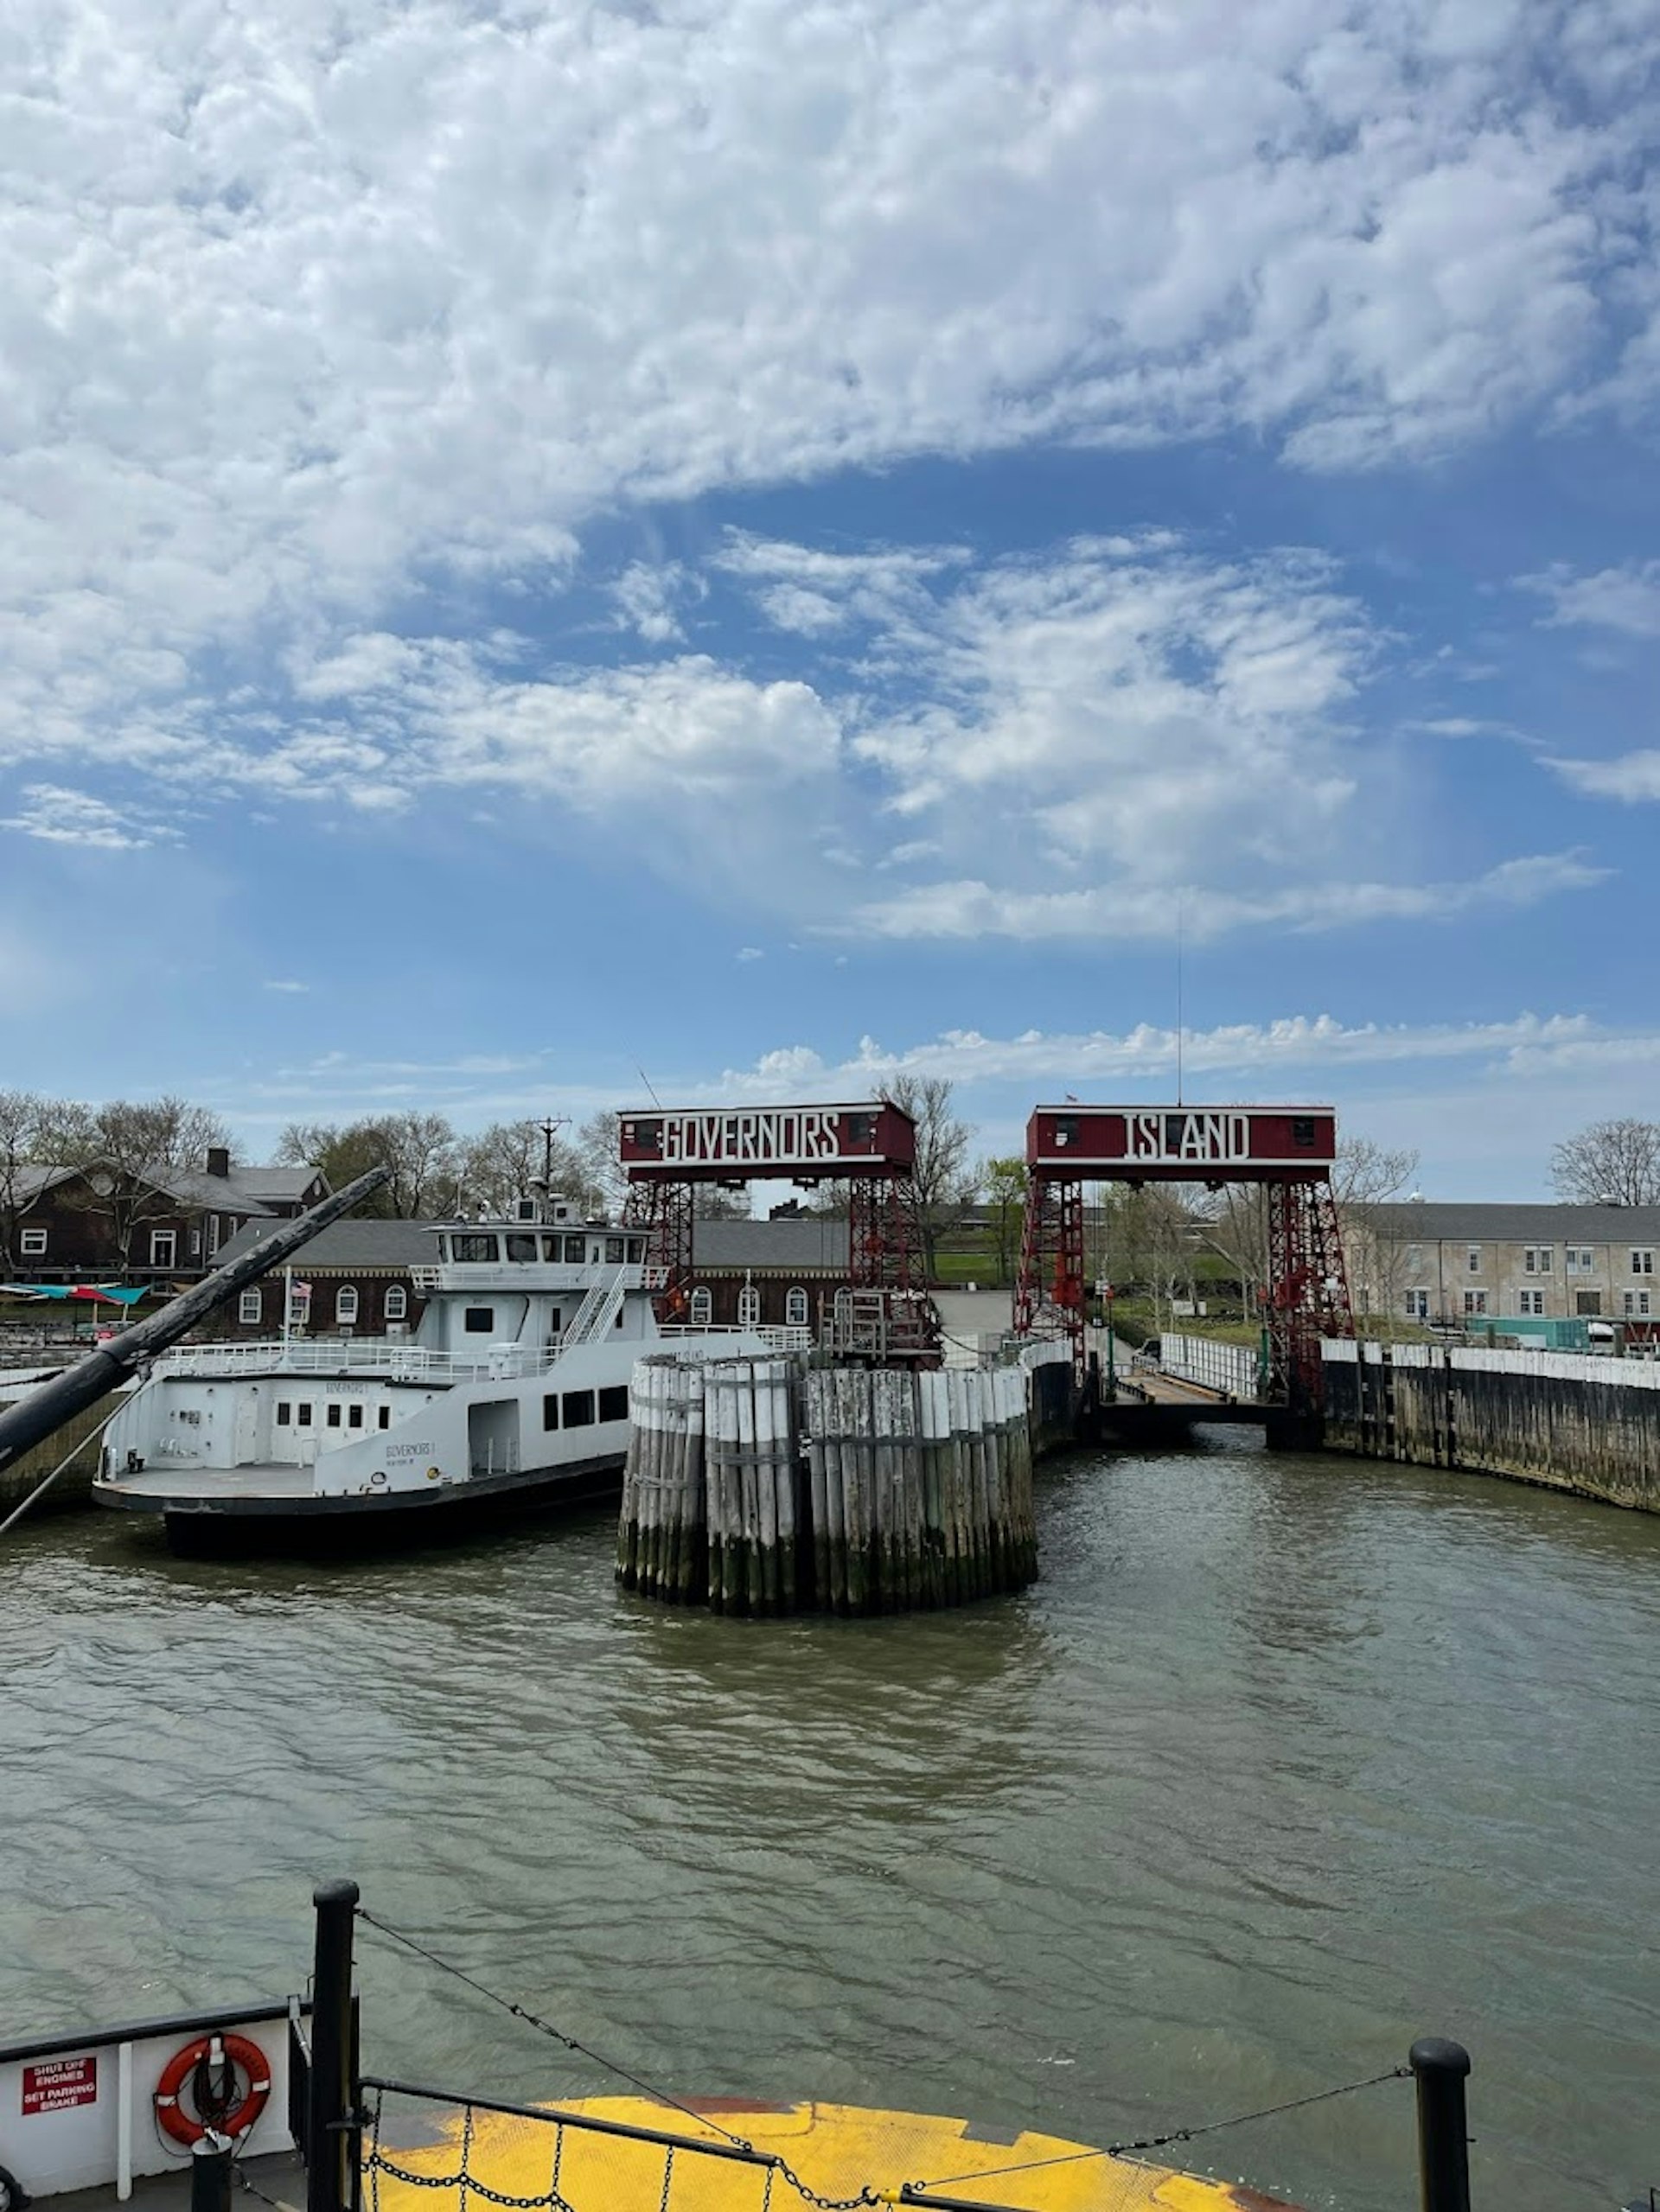 The ferry arriving to Governors Island, New York City